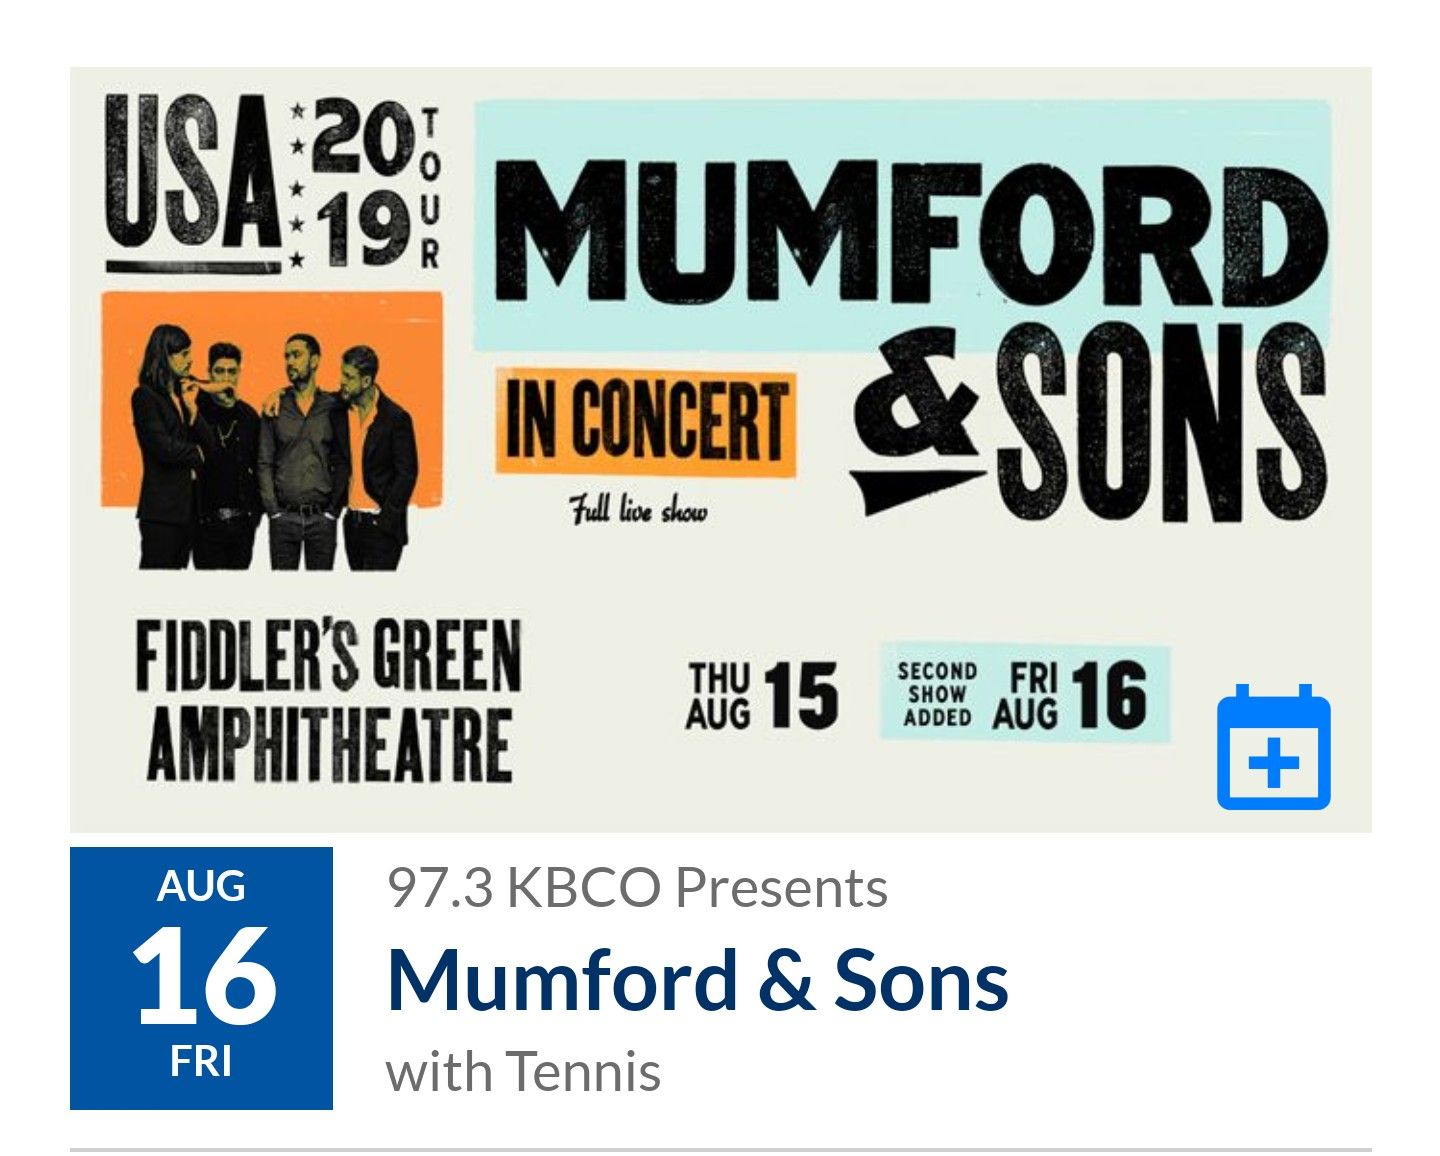 Mumford and sons GA tickets for 8/16